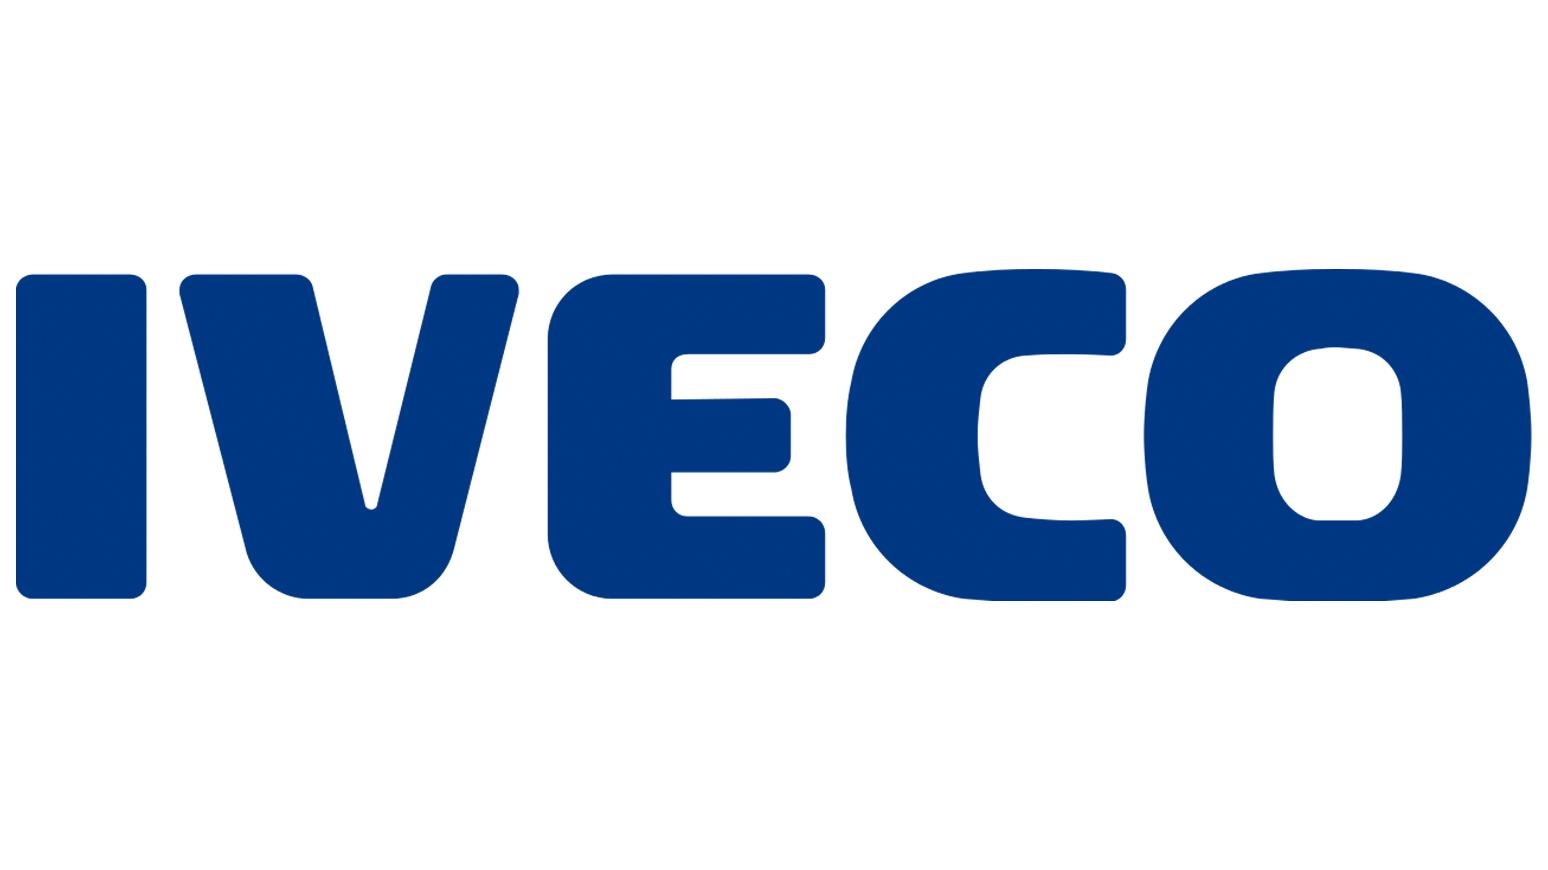 IVECO LIVE CHANNEL Provides New Way For Customers To Interact With The Brand